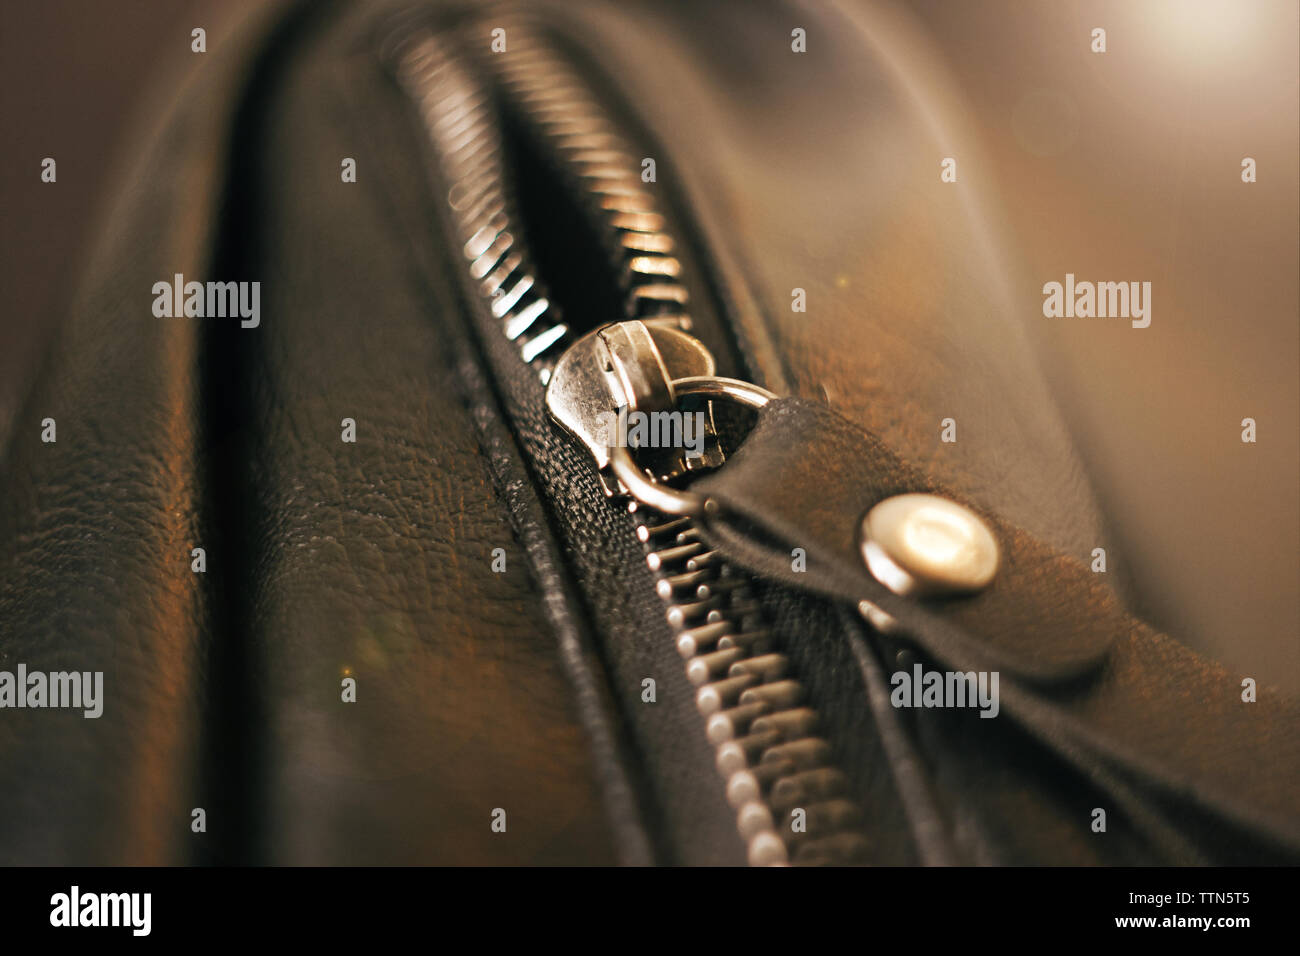 Metal zipper on the pocket on the black leather bag, illuminated by light Stock Photo